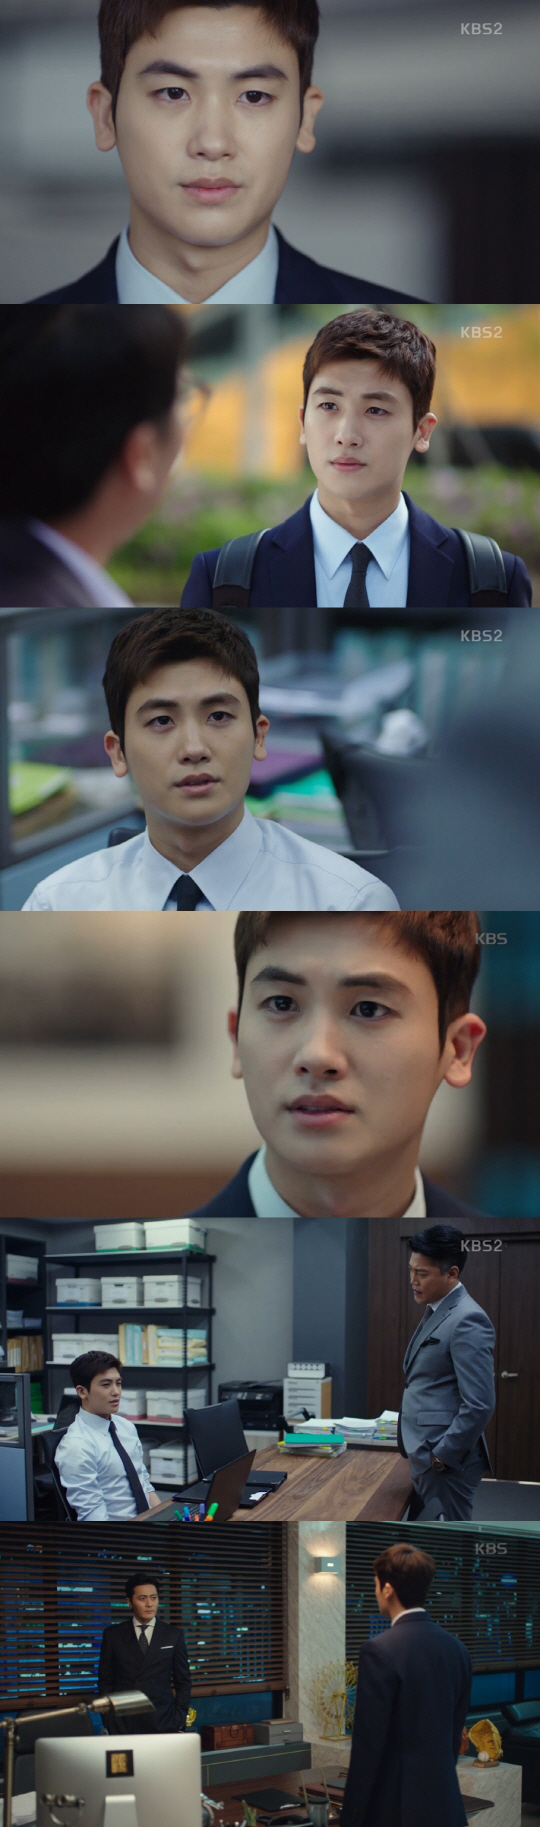 Park Hyung-sik of KBS2 drama Suits is shaking her emotions with the growth drama of a fake lawyer.Park Hyung-siks role in the play is a pretty big change: early on he was a silly, bruising rookie.Ko Yeon-woo, who lived his life at the bottom because he could not catch the opportunity to use It even with a genius memory, struggled to appeal his presence to Miniforce Seok (Jang Dong-gun), who gave him the opportunity for the first time.Although he was more nervous about concealing his weak appearance, he could not hide his newbies unique clumsy futility and became a target of hyenas such as Choi Gwi-hwa, who caught It in a remarkable way.In the mock court, which was a great chance, sympathy was triggered by the tears of Kim Ji-na (Go Sung-hee).The new struggle filled with bruises of Ko Yeon-woo, who realized the lesson in it while experiencing countless failures and stepped forward with the advice of Miniforce, was enough to stimulate the maternal love of female fans.The new version of the story has changed: it has been upgraded to a fake lawyer who can set his claws and provoke him, and who knows how to speak directly to Miniforce.On the 16th, Suits featured the growth and change of the late actress. Ko Yeon-woo was assigned to the forgery of education.Although the heart was forced to be a fake lawyer, Ko Yeon-woo, he blocked the suspicion by refuting the words of Chae Keun-sik.Such a high-ranking man made a direct statement toward the Miniforce seat in the past dilemma.Ko Yeon-woo saw the shorthand of the last case that Miniforce had taken before he came out of the prosecution and knew what was going on between Miniforce and the misjudicial (Jeon No-Min).Miniforce was skeptical that his senior prosecutor, who believed and followed, had destroyed the evidence and took off his clothes. But Miniforce still believed in misjudgment.He refused to persuade the ophthalmologist, hoping that he would admit his mistake.Looking at the hesitant Miniforce, Ko said, I do not know why you are trying to protect the guilty prosecutor.If the lawyer is not shaken by the emotions, should not you pick up the knife that you put in the sheath? Ko Yeon-woo, who was dragged around and could not speak out, was changed by 180 degrees.Park Hyung-sik also has excellent character expression and strong control, and it has increased the immersion of viewers by drawing the growth period of Ko Yeon-woo.Thanks to Park Hyung-sik, who has been completely melted into the actual character, there is a line of opinions that he will empathize with Ko Yeon-woo and support his growth.And this change of the high-ranking actor makes the future development change look forward. The growth of the high-ranking actor will affect the Miniforce stone and the law firm.In particular, I wonder how the Miniforce seat, which received the direct remarks of Ko Yeon-woo, will change the course of action and how it will affect the future of the two people. The Suits broadcast on this day recorded 8.8% (Nielsen Korea, national standard) TV viewer ratings,SBS Switch - Change the World was broadcast 5.1%, 5.6%, MBC Come and Hug was 3.1% and 3.9% TV viewer ratings.